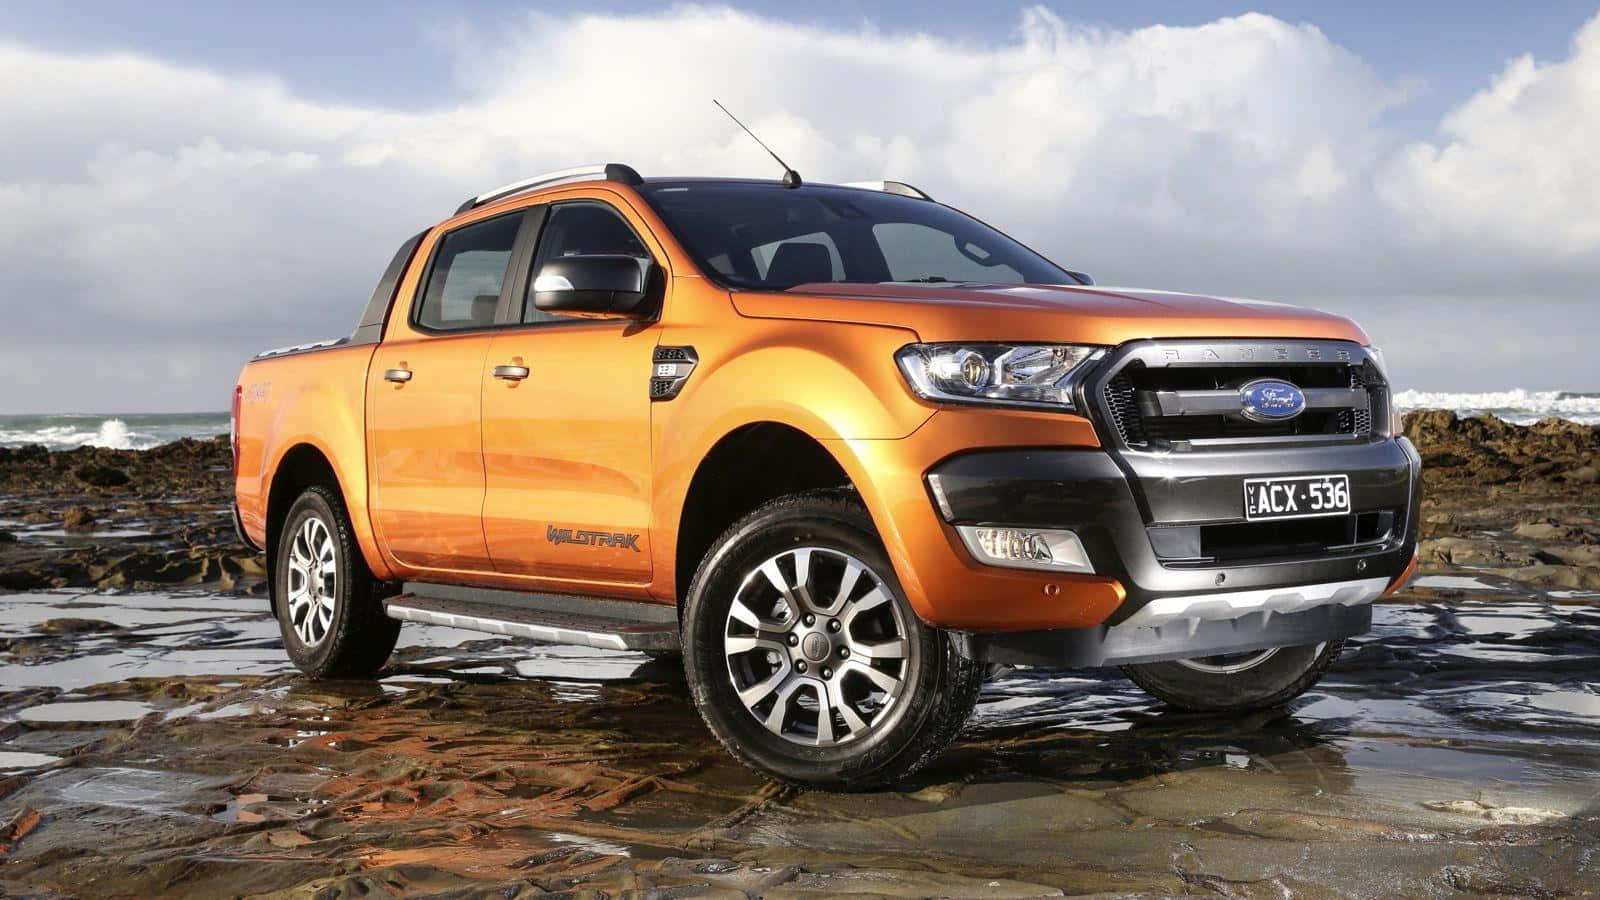 Powerful Ford Ranger cruising on the road Wallpaper